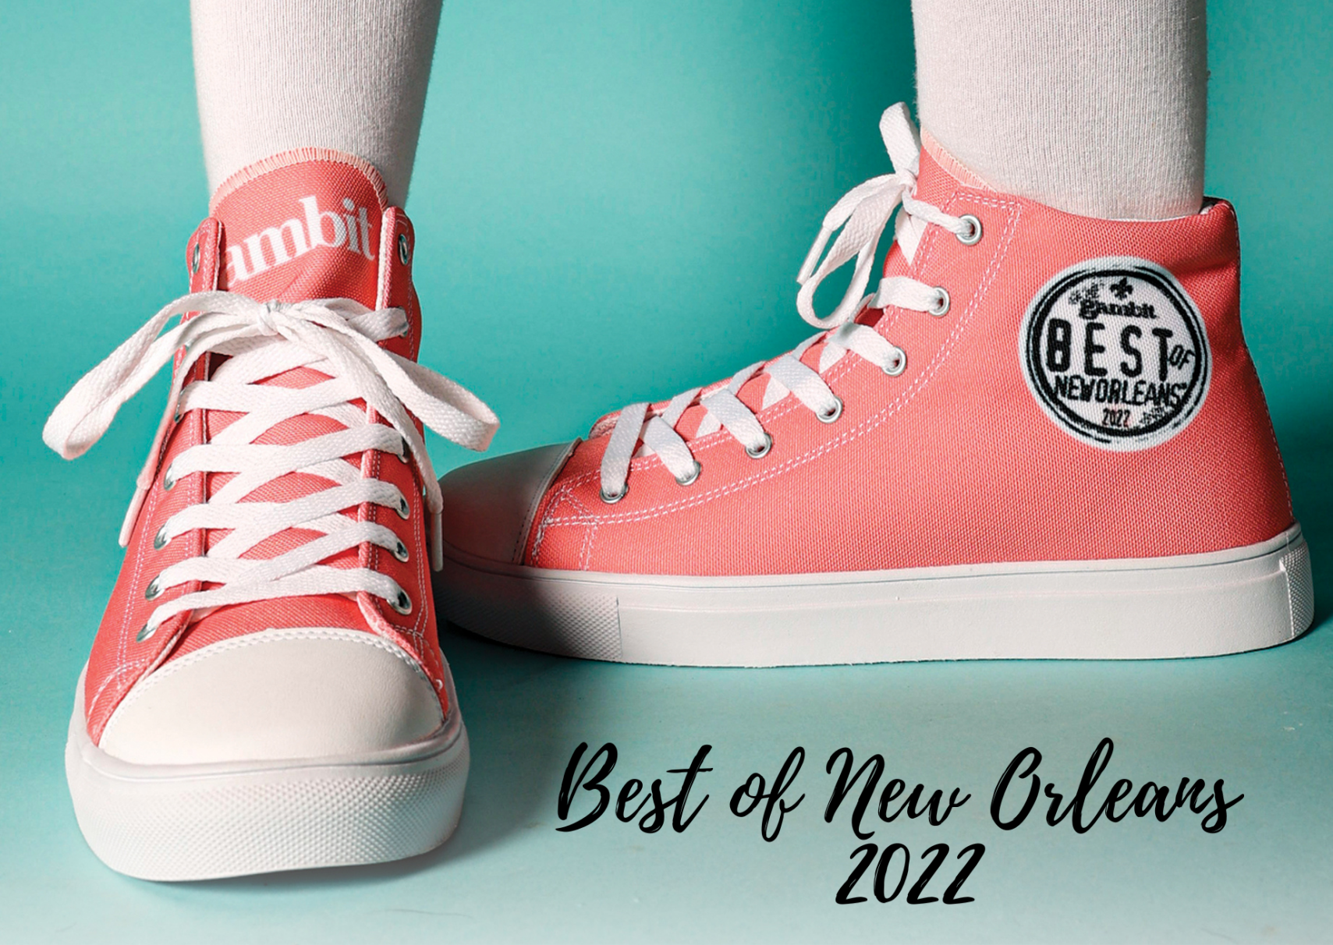 Gambit's Best of New Orleans 2022 Best Of New Orleans